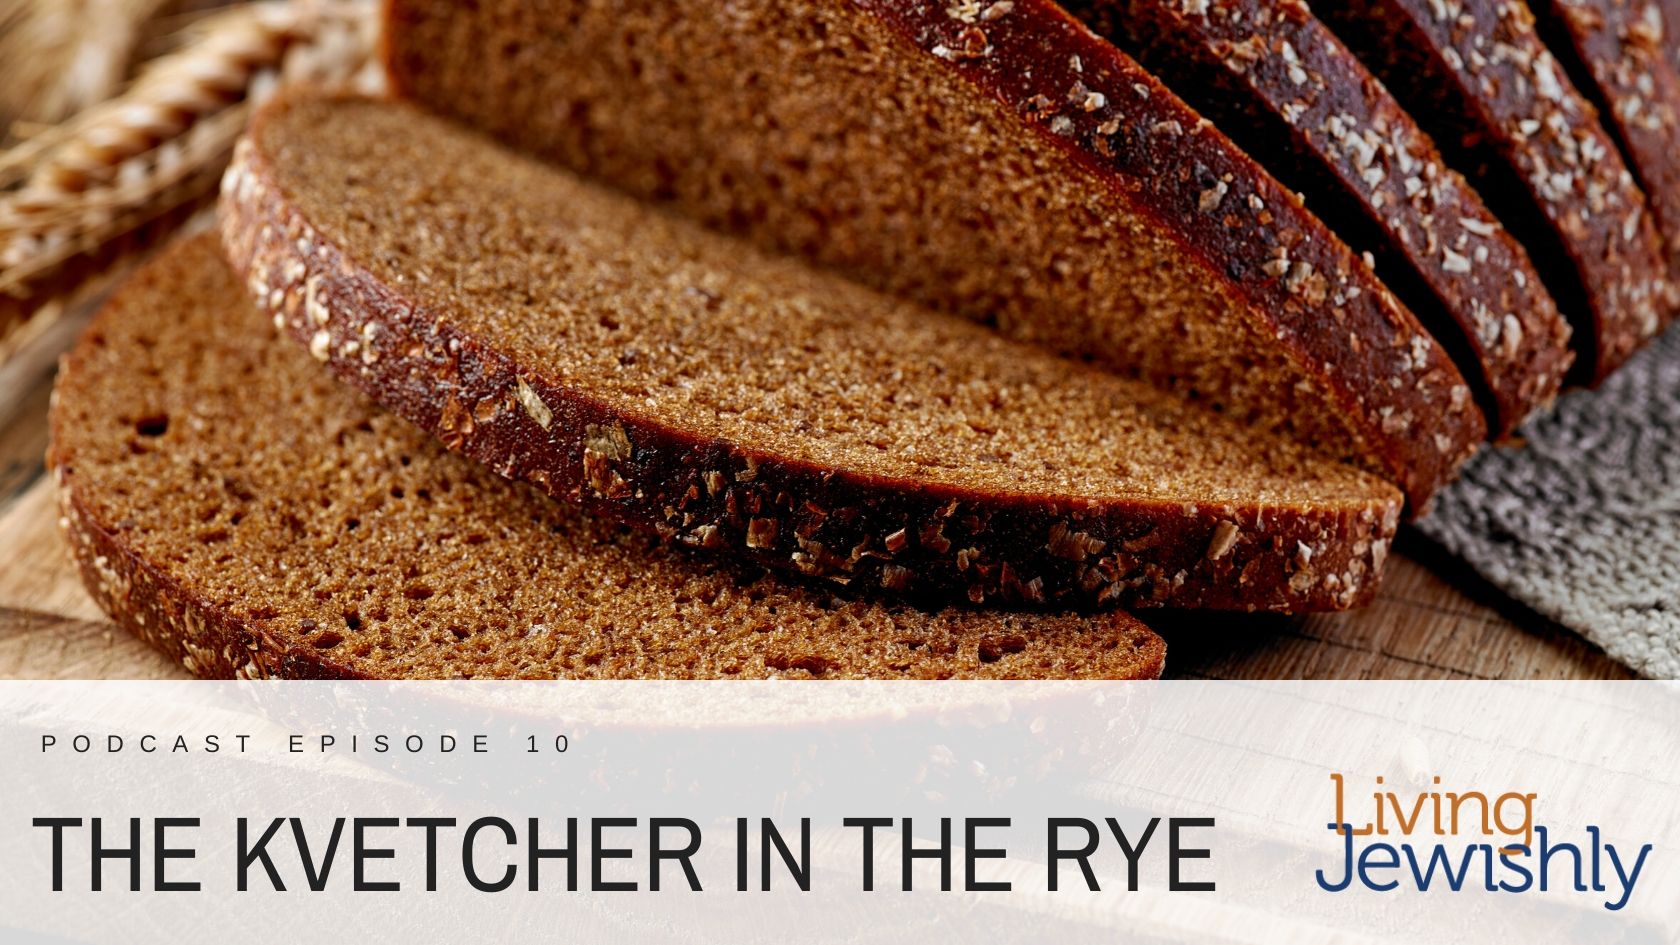 Podcast Episode 10: The Kvetcher in the Rye